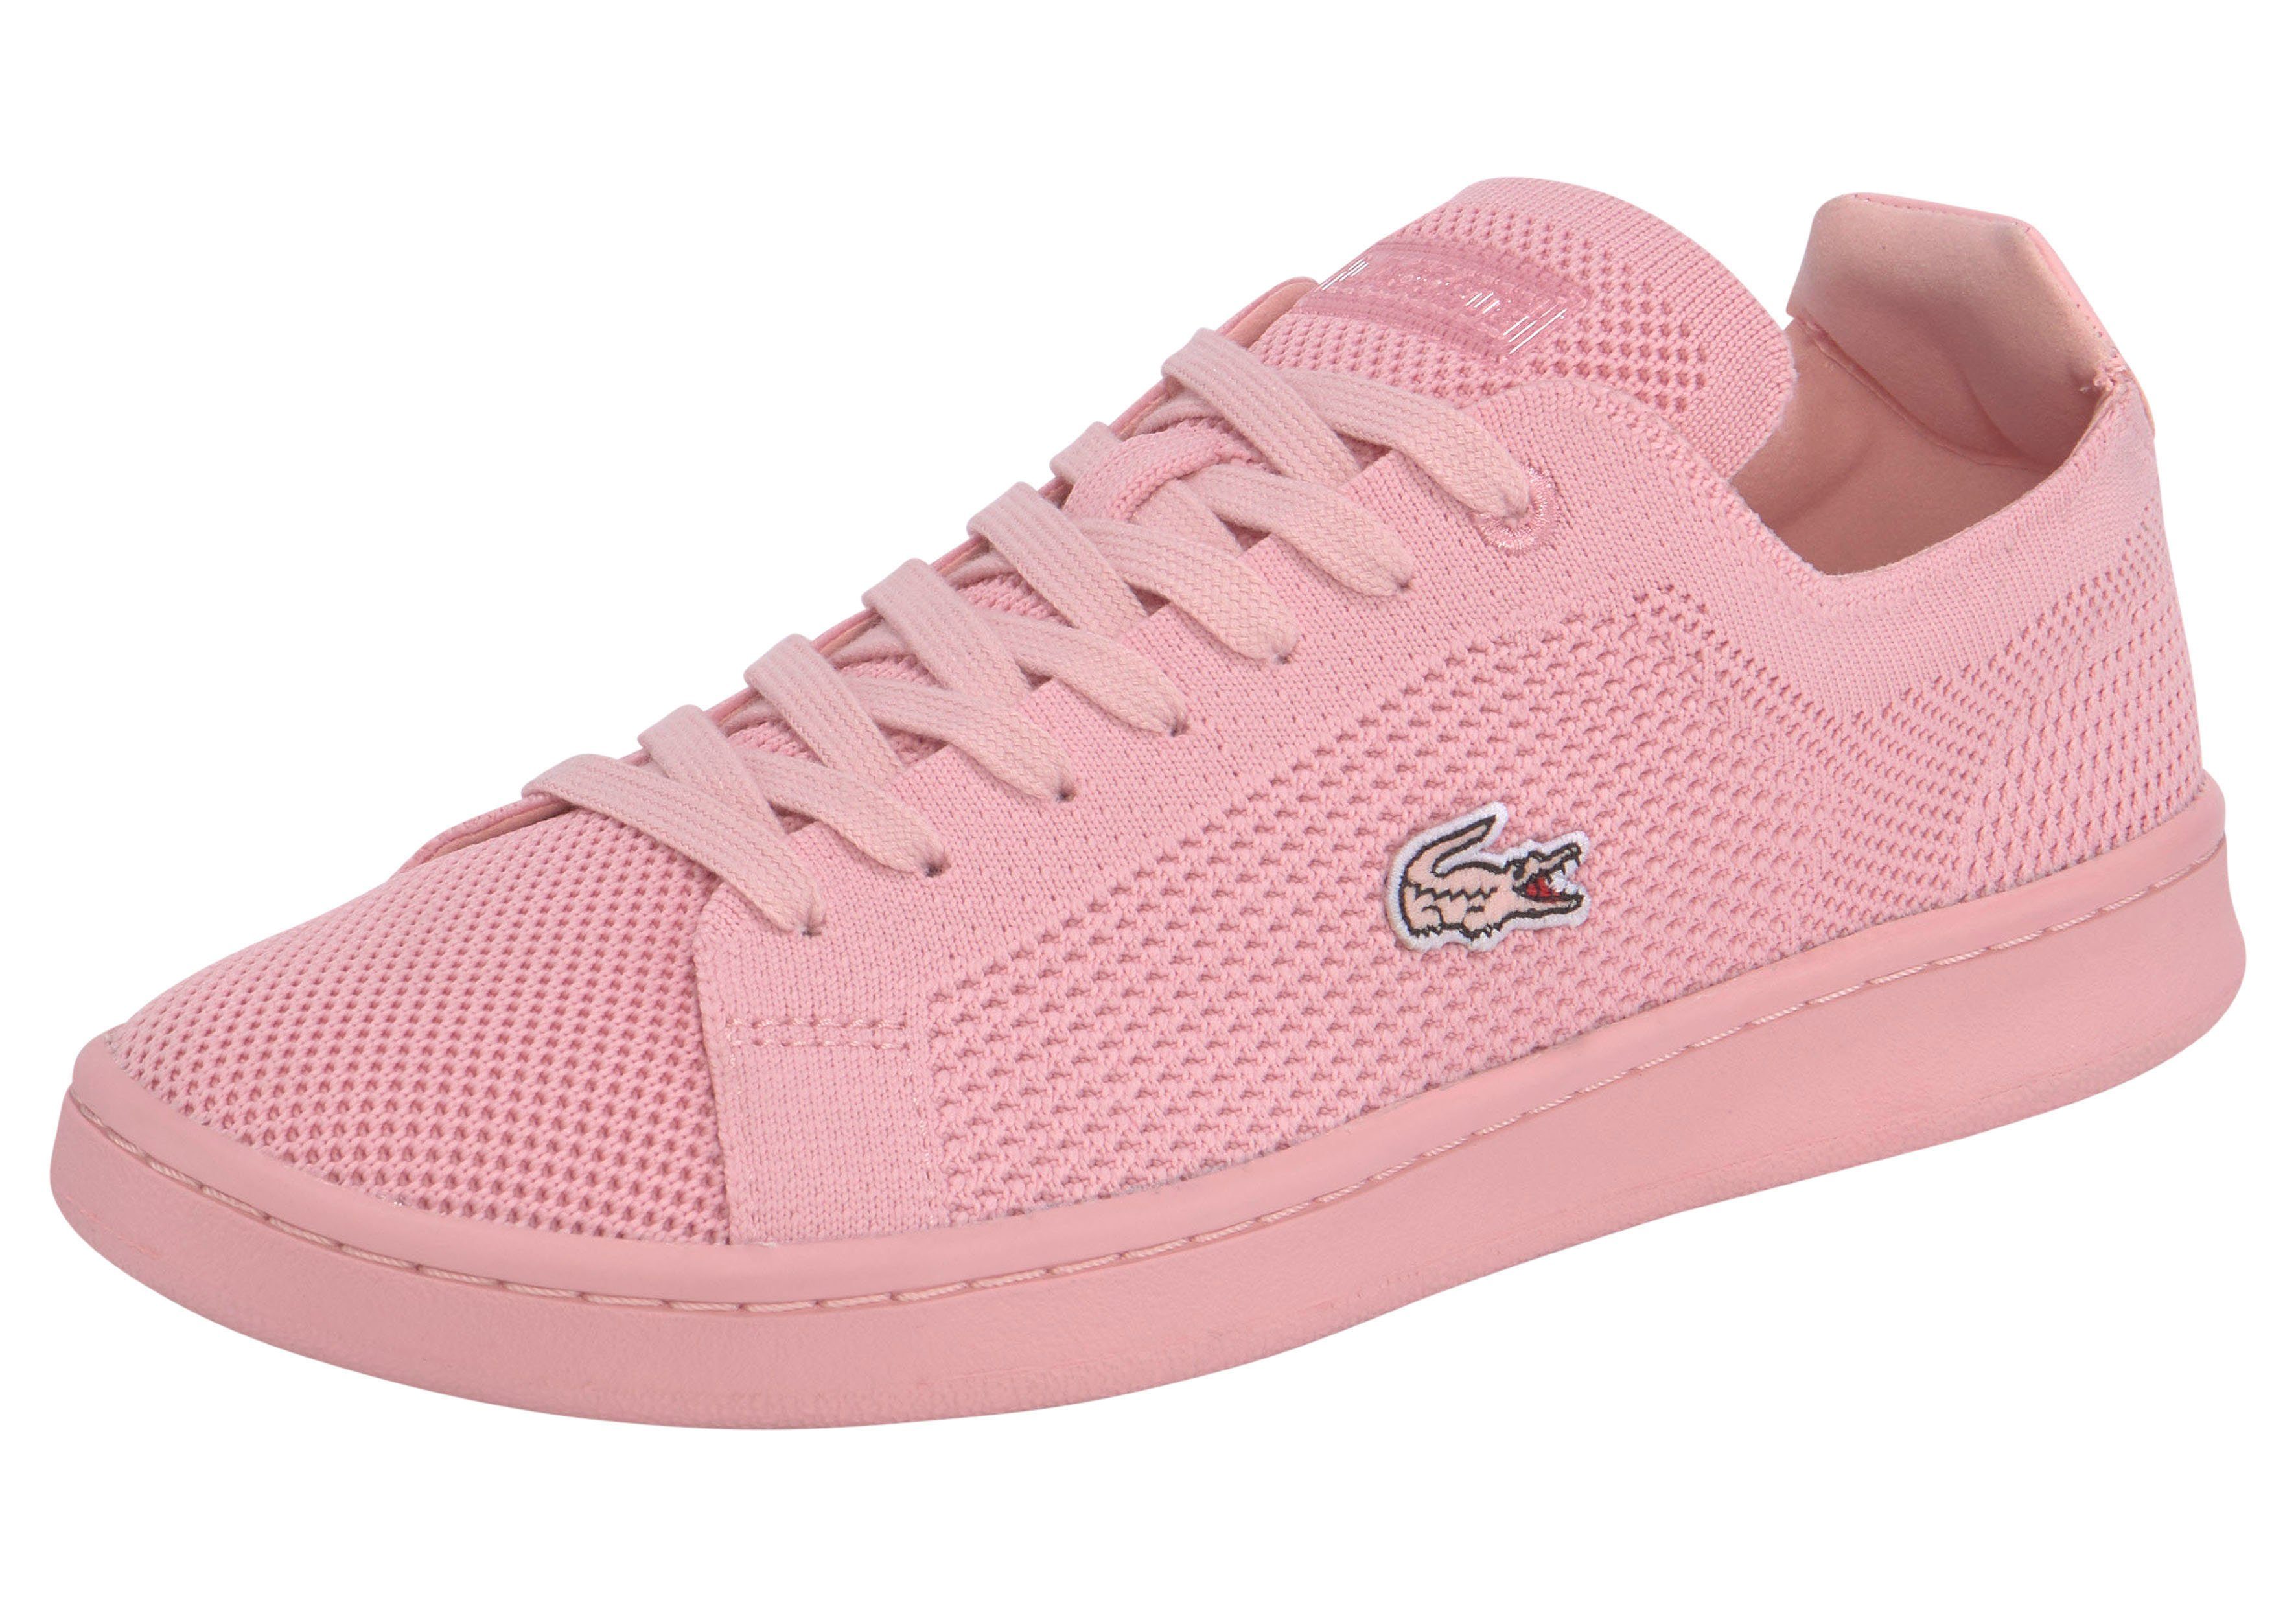 Lacoste CARNABY PIQUEE 123 1 SFA Sneaker pink